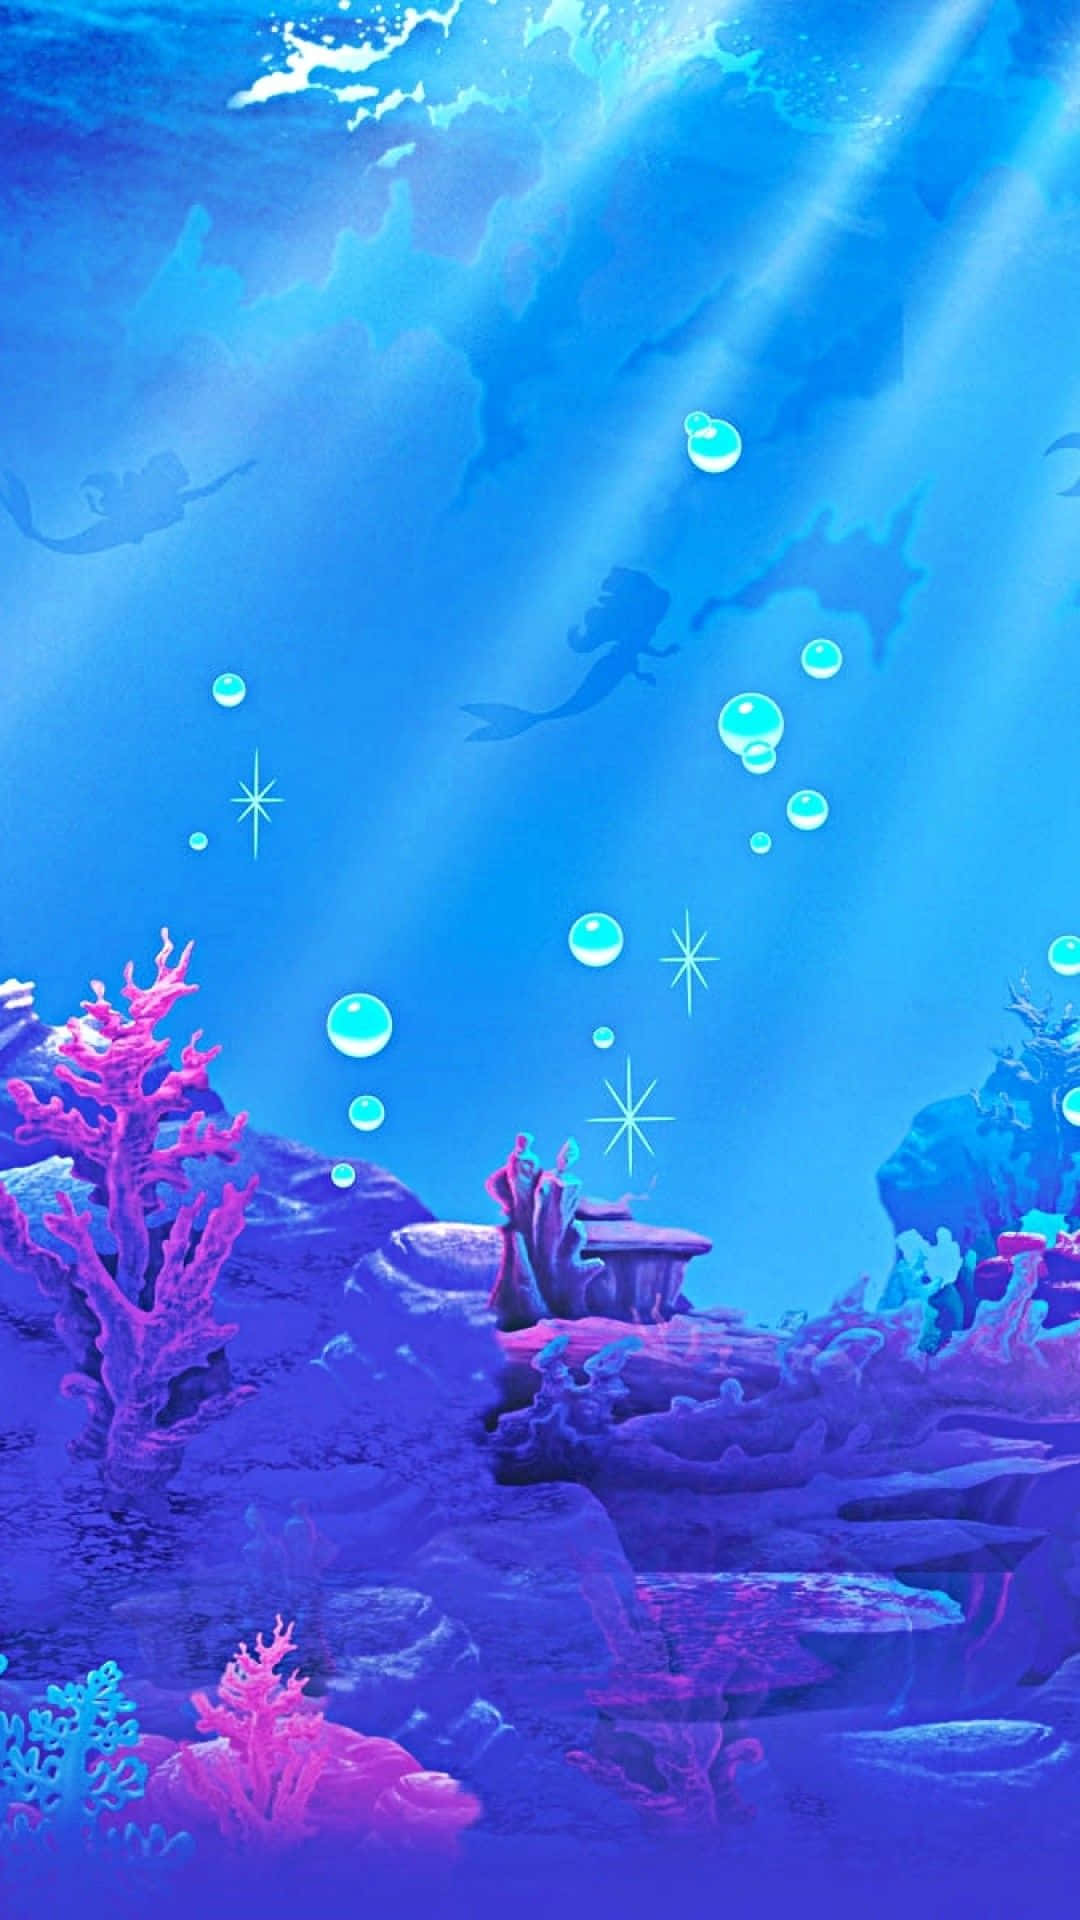 Ariel and her friends embracing their new life above the sea Wallpaper